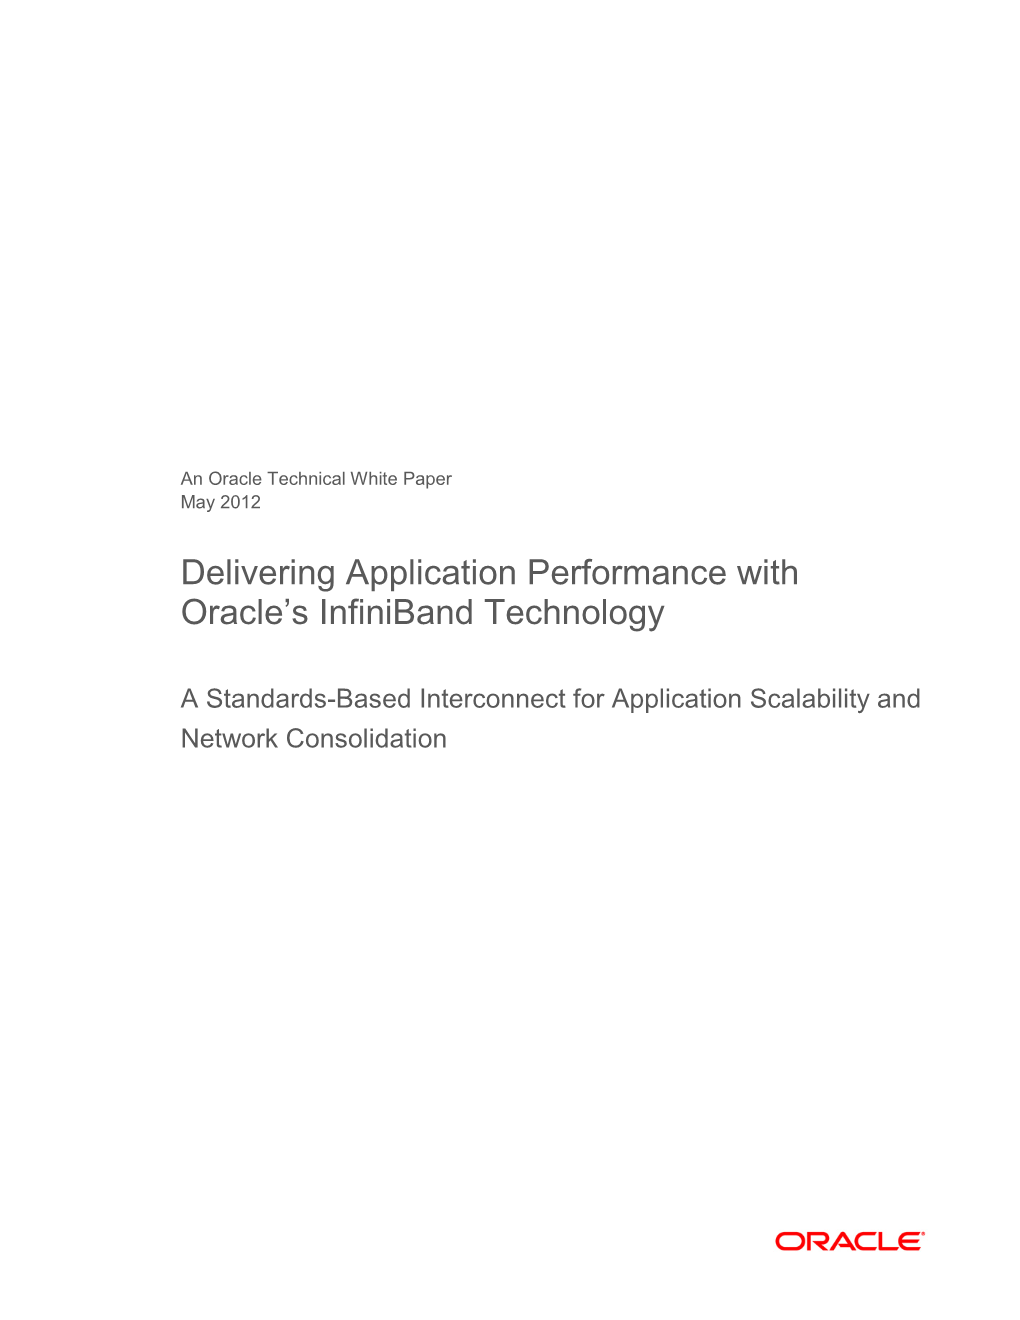 Delivering Application Performance with Oracle's Infiniband Technology